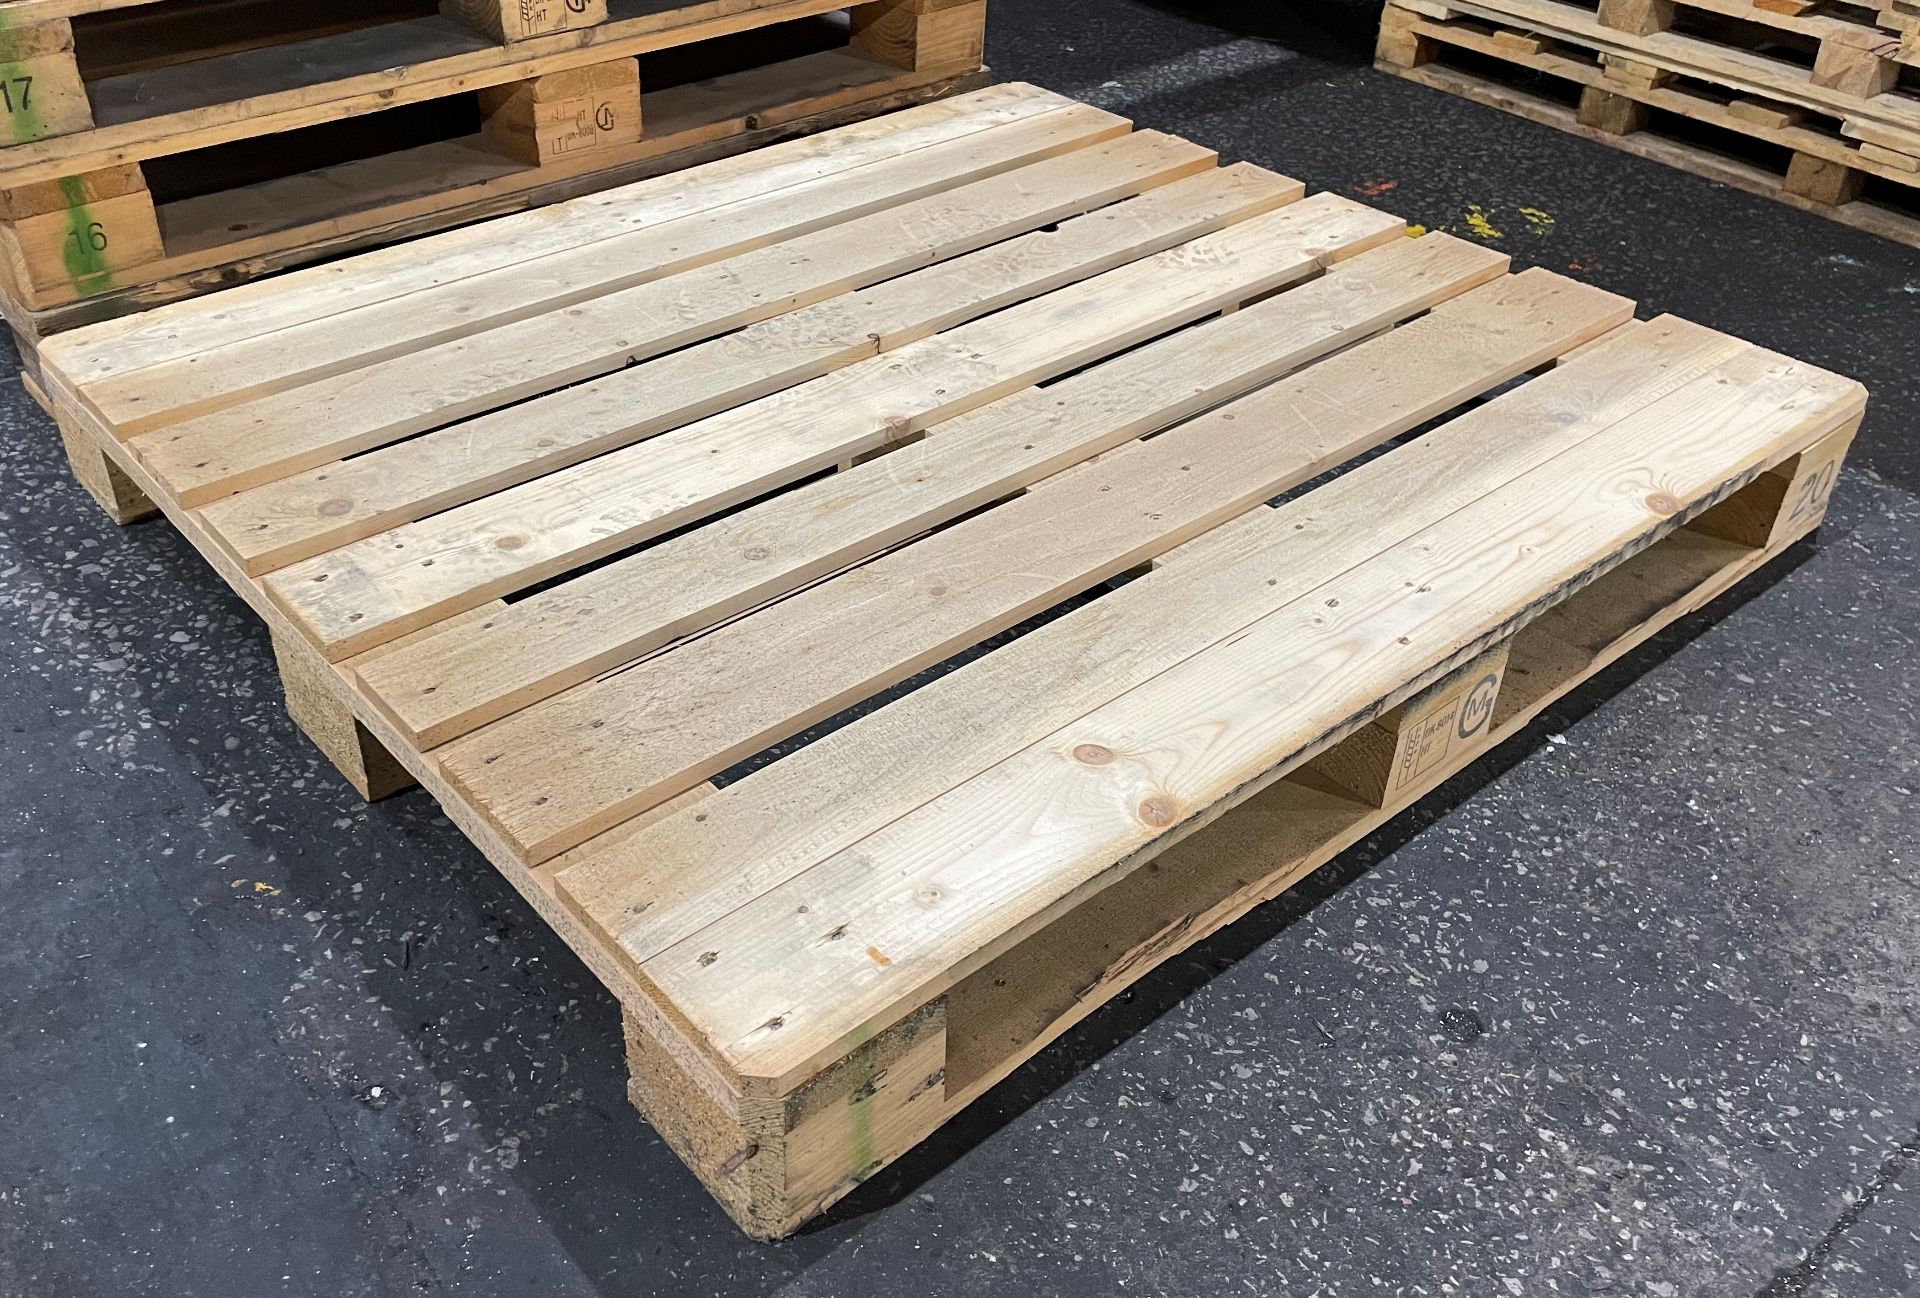 25 Timber 2 way Pallets, 1200mm x 1300mm. - Image 2 of 2